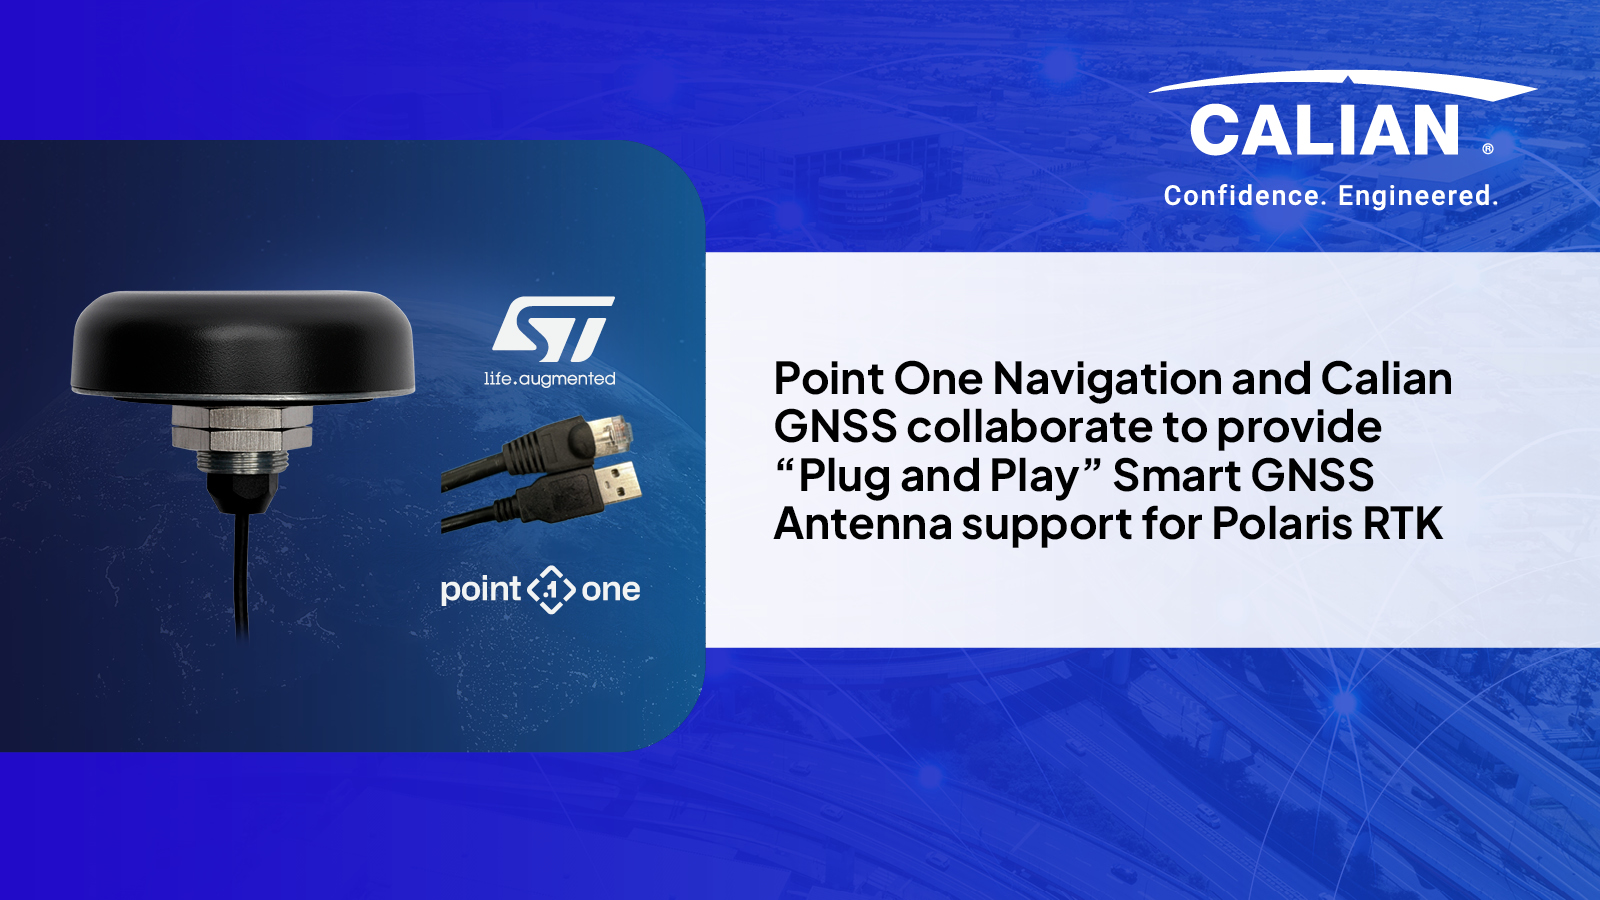 Point One Navigation and Calian GNSS collaborate to provide “Plug and Play” Smart GNSS Antenna support for Polaris RTK